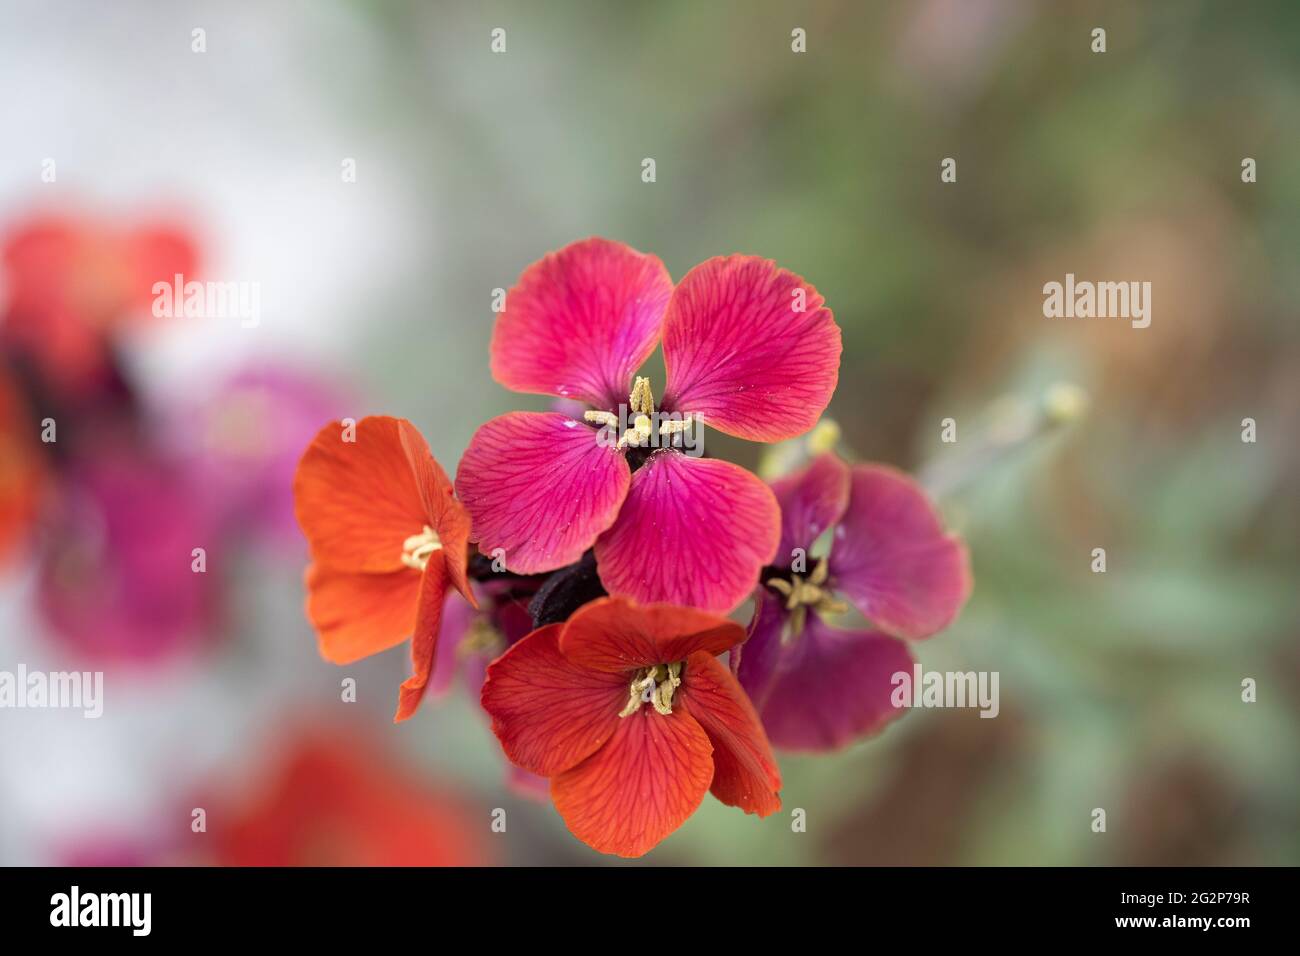 Coseup of Erysimum (common name Wallflower) 'Red Jep' are flowering plants from the family Brassicaceae with 4 petalled flowers. Austria Stock Photo